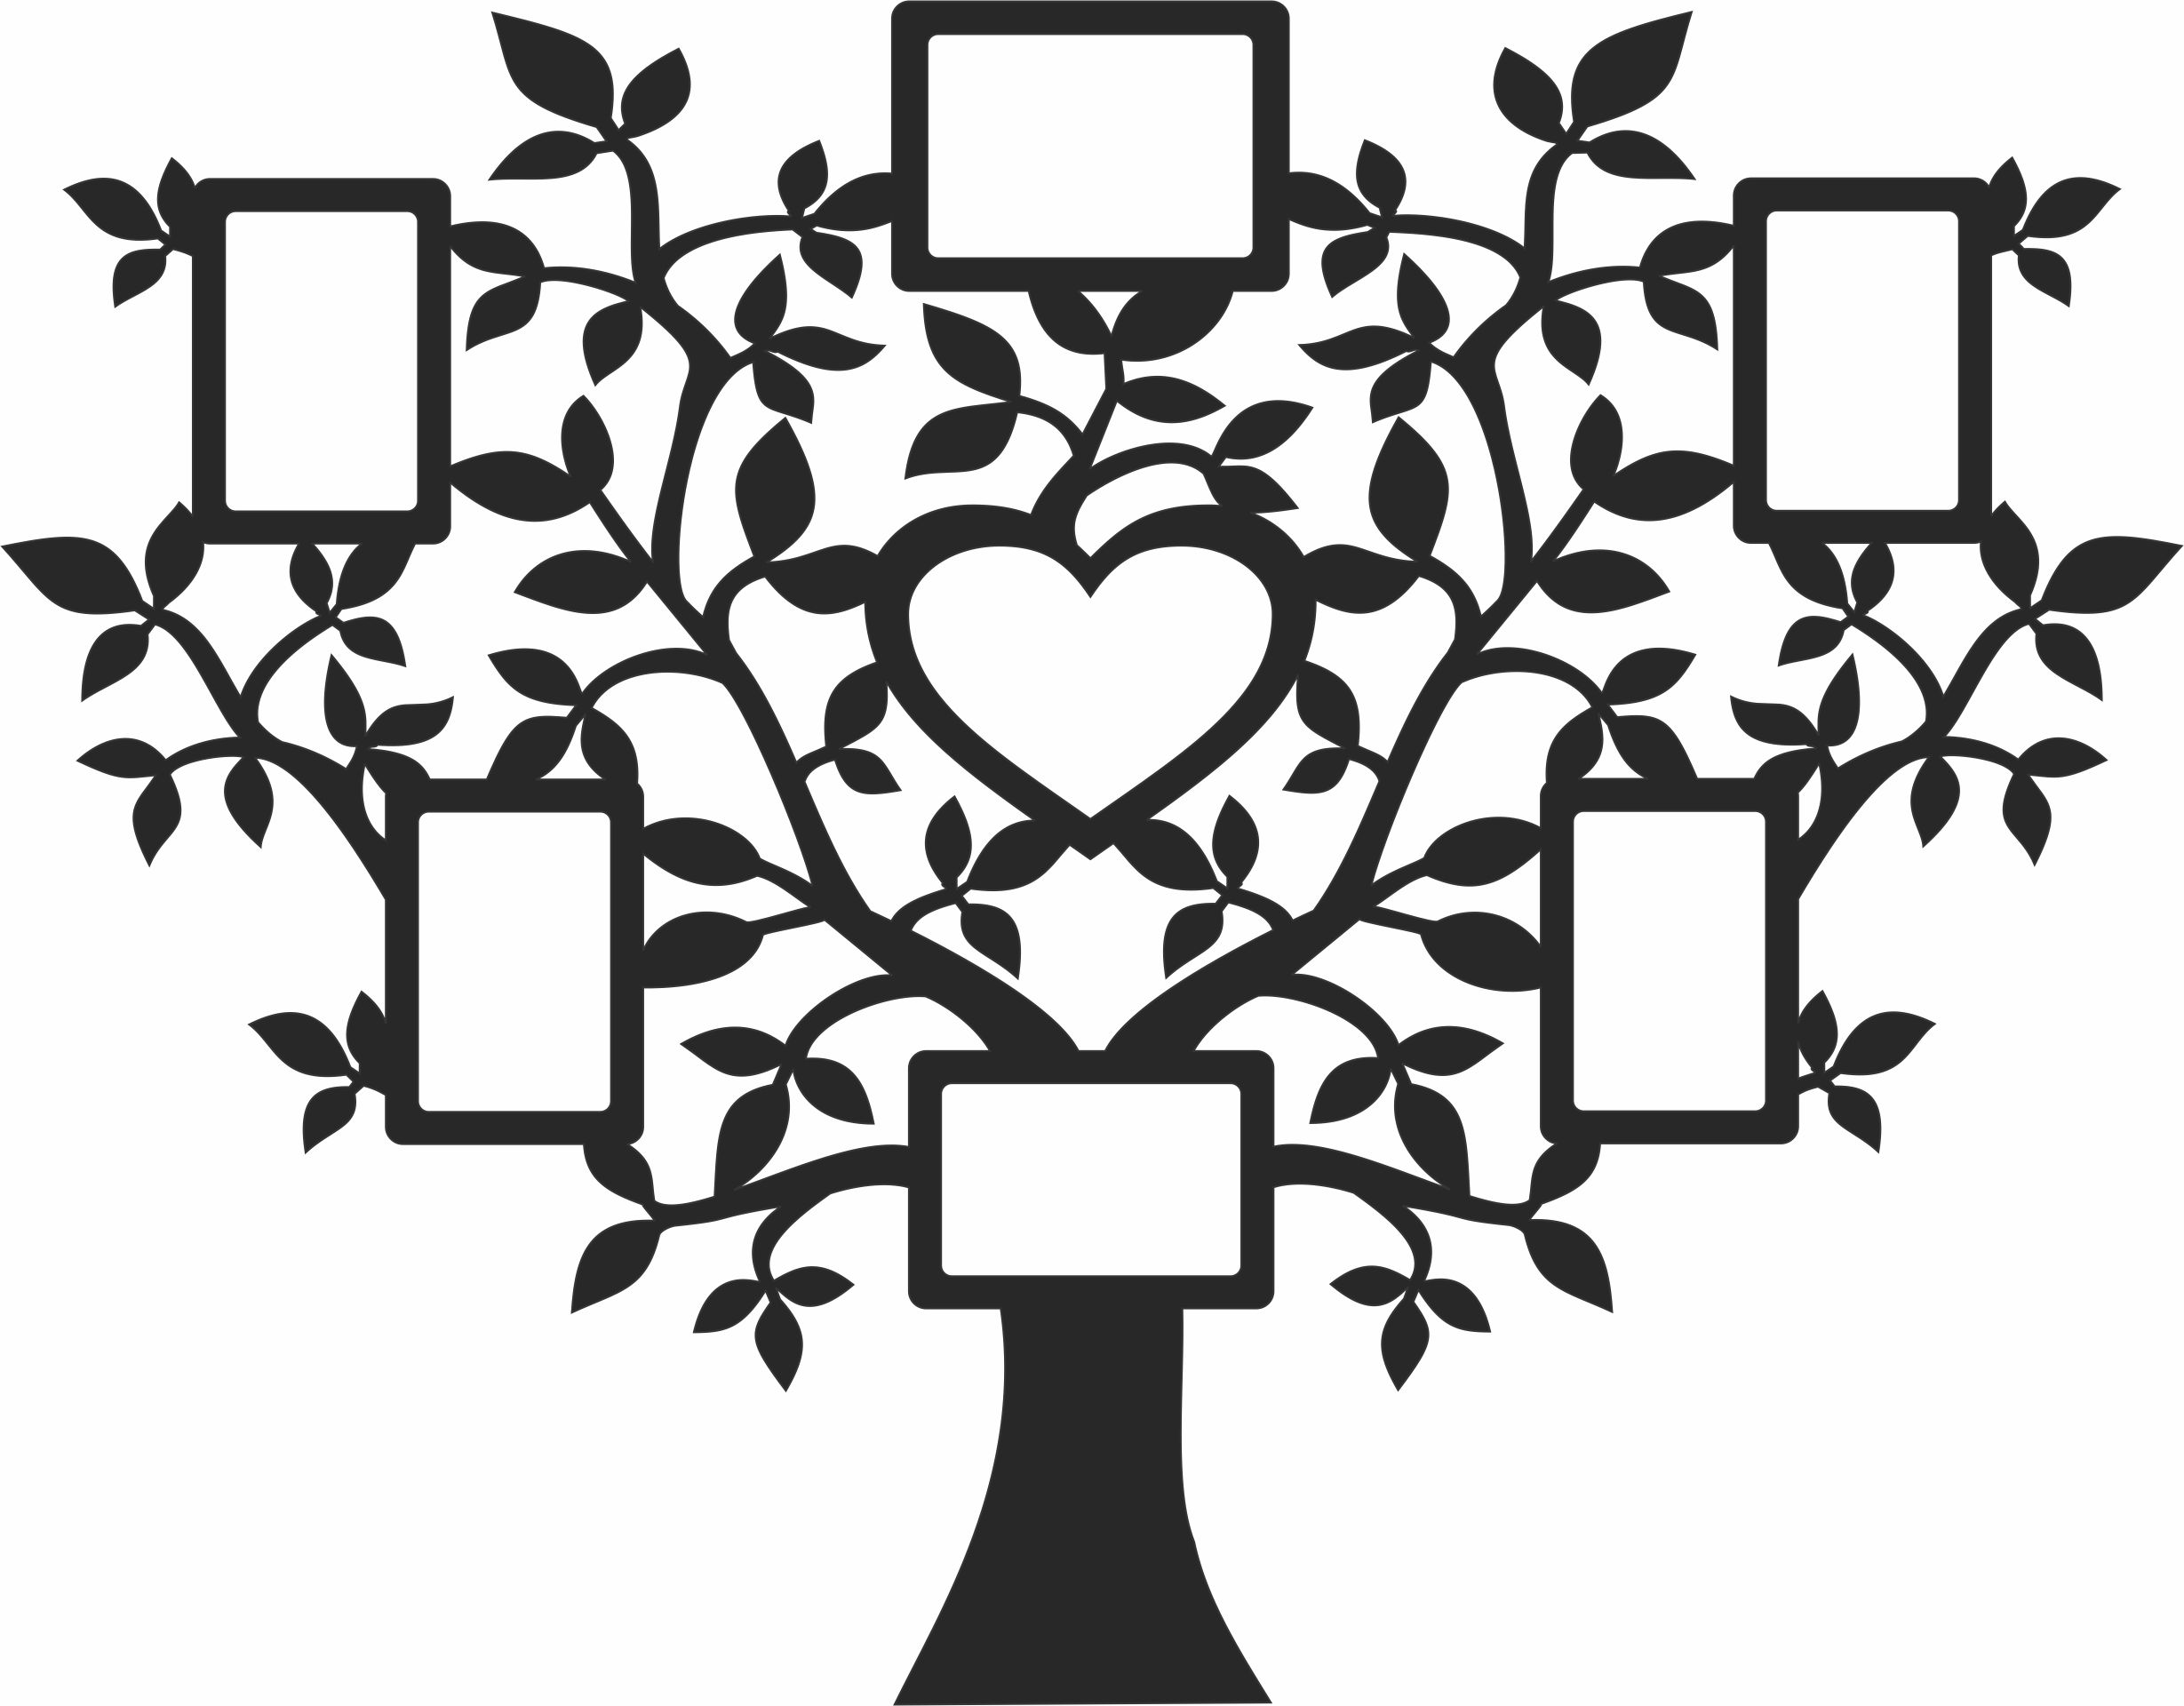 Download Family Tree with 7 Photo Frames - For Laser Cut DXF CDR SVG Files - free download - DXF vectors